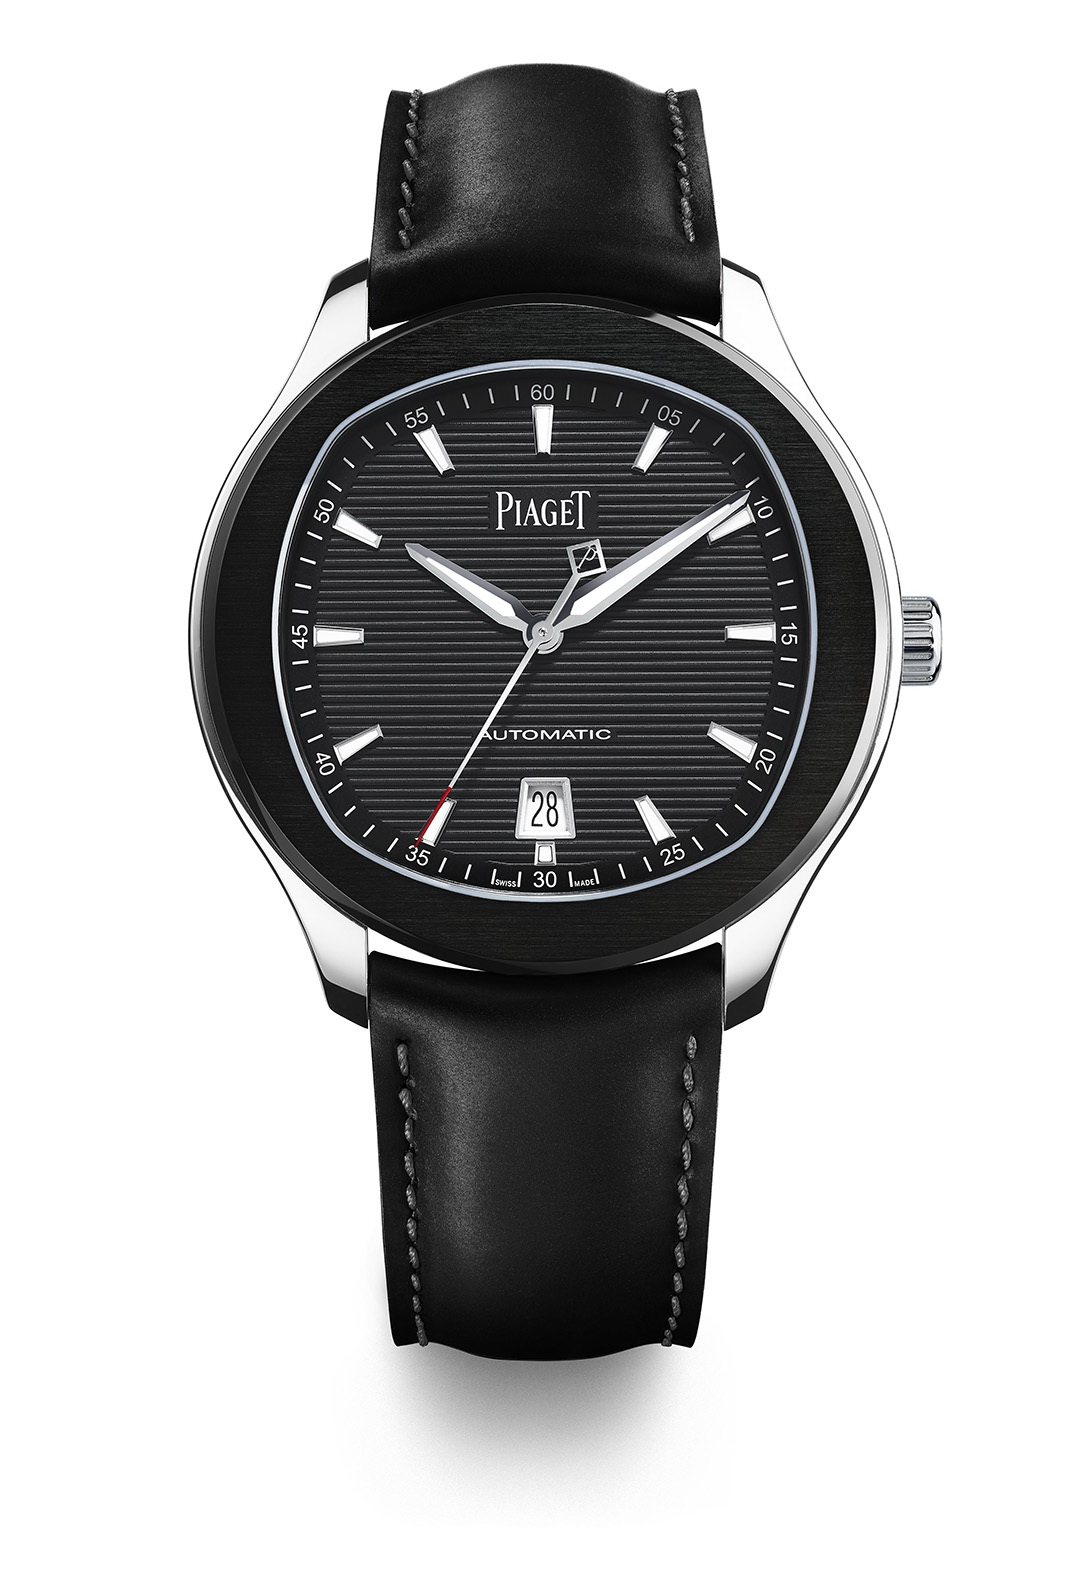 Piaget polo s watch – 42 mm  case in steel, sapphire case-back, black adlc bezel, black colored dial with silvered appliques indexes with superluminova, manufacture piaget 1110p self-winding mechanical movement (hours, minutes, seconds, date at 6 o’clock, slate grey oscillating weight) 9. 4 mm thickness and water resistant up to 100 m black rubber strap set with an ardillon buckle delivered with a second black calfskin strap edition limited to 888 pieces